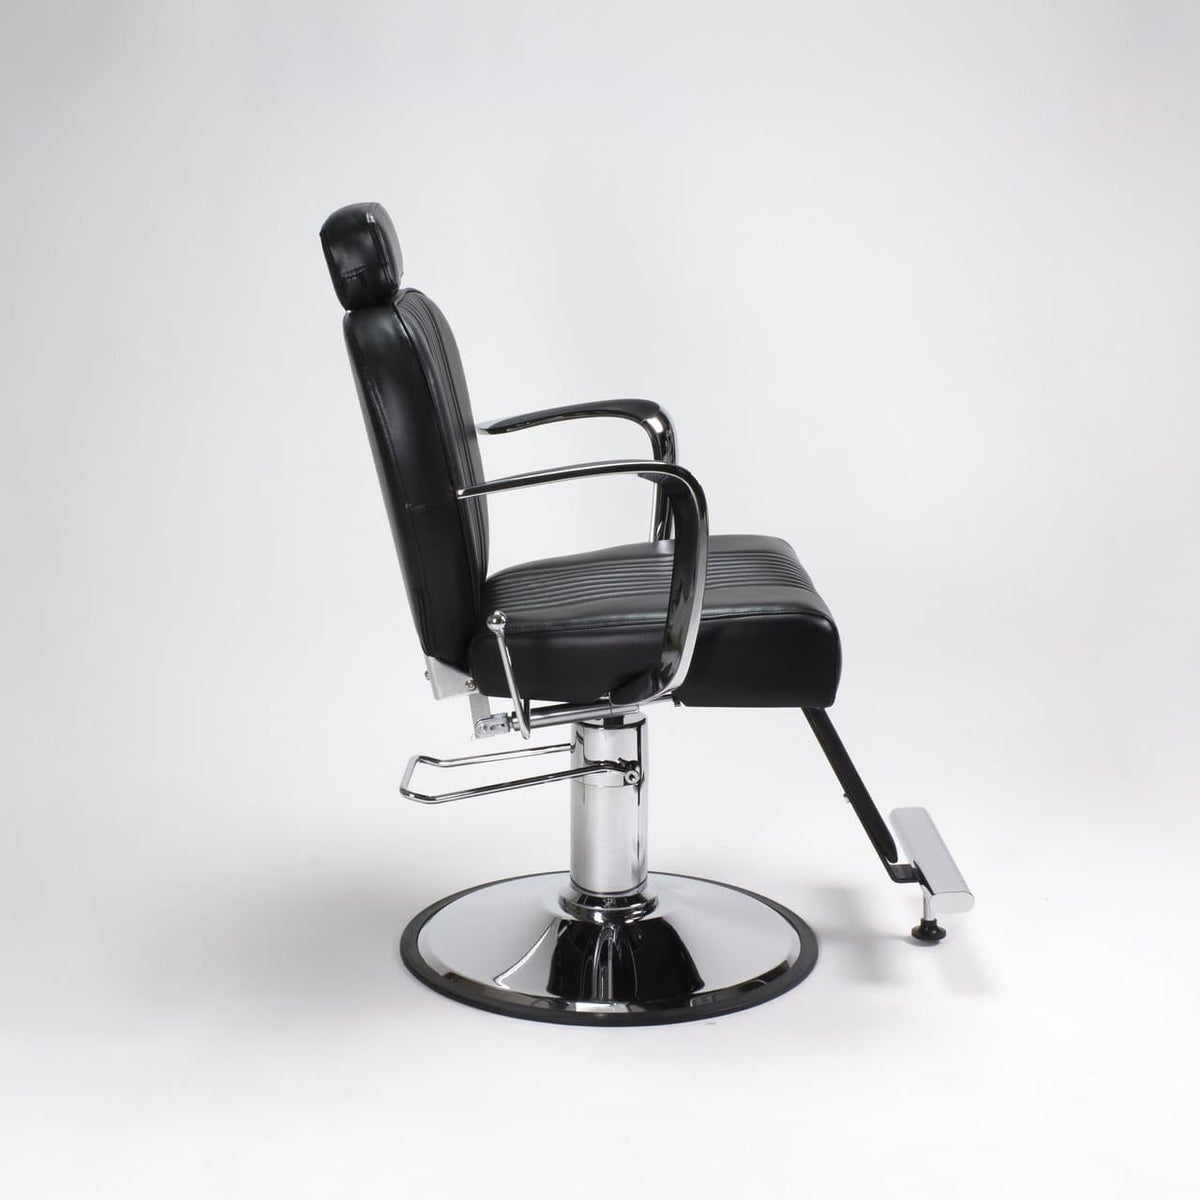 Berkeley Berkeley Austen All Purpose Styling Chair Styling Chair - ChairsThatGive